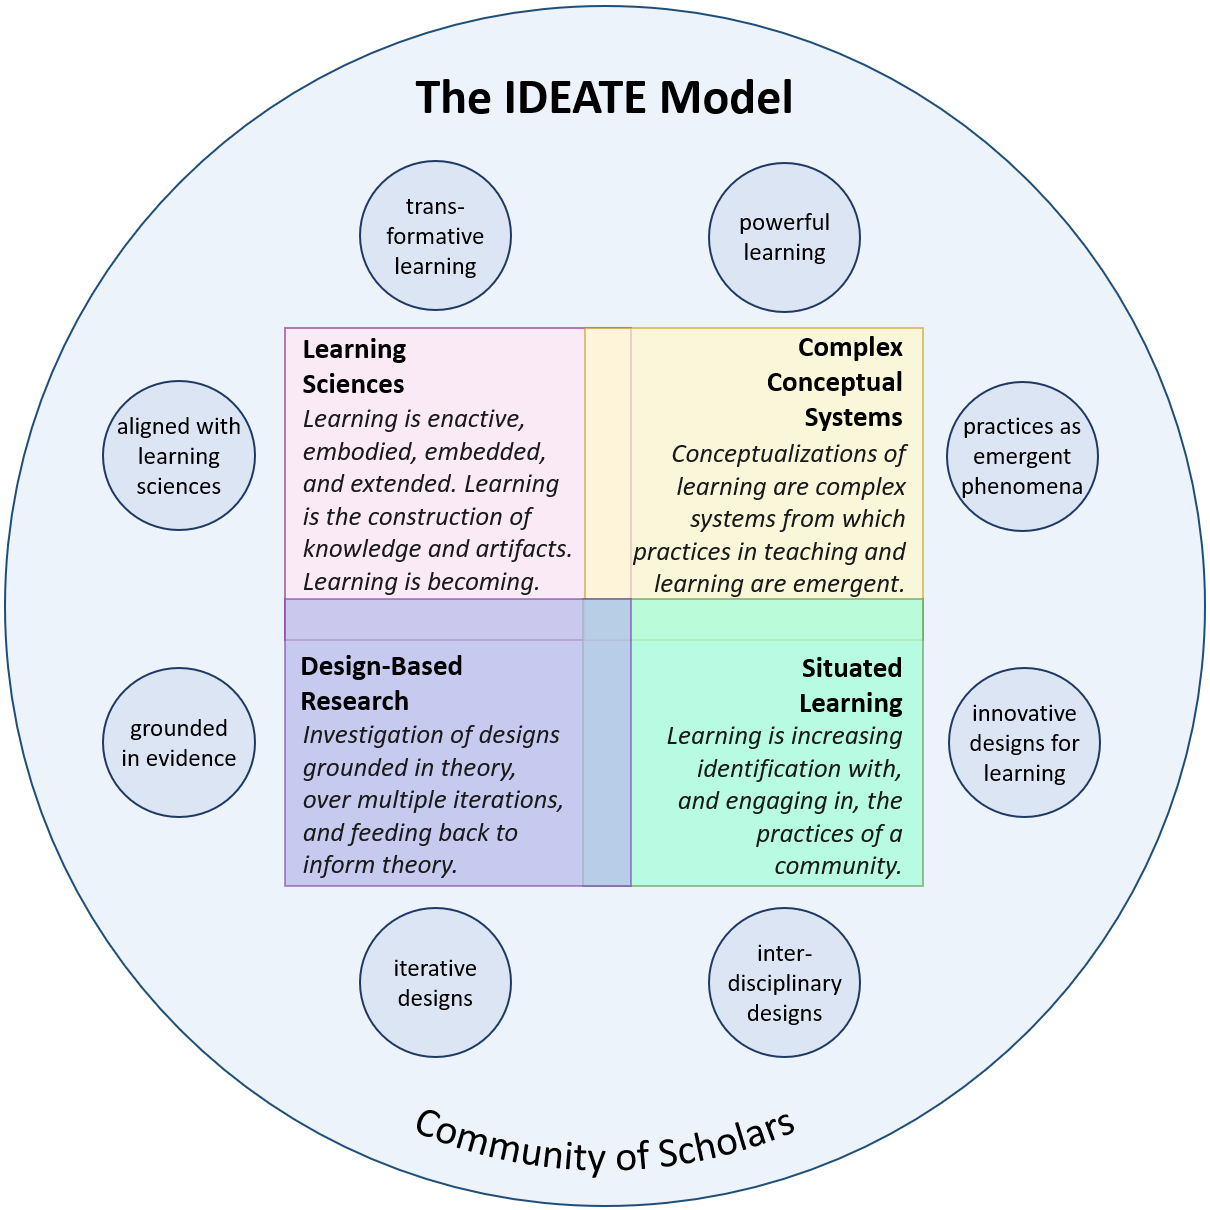 This is a visual representation of the paper that explains the IDEATE Community Model.